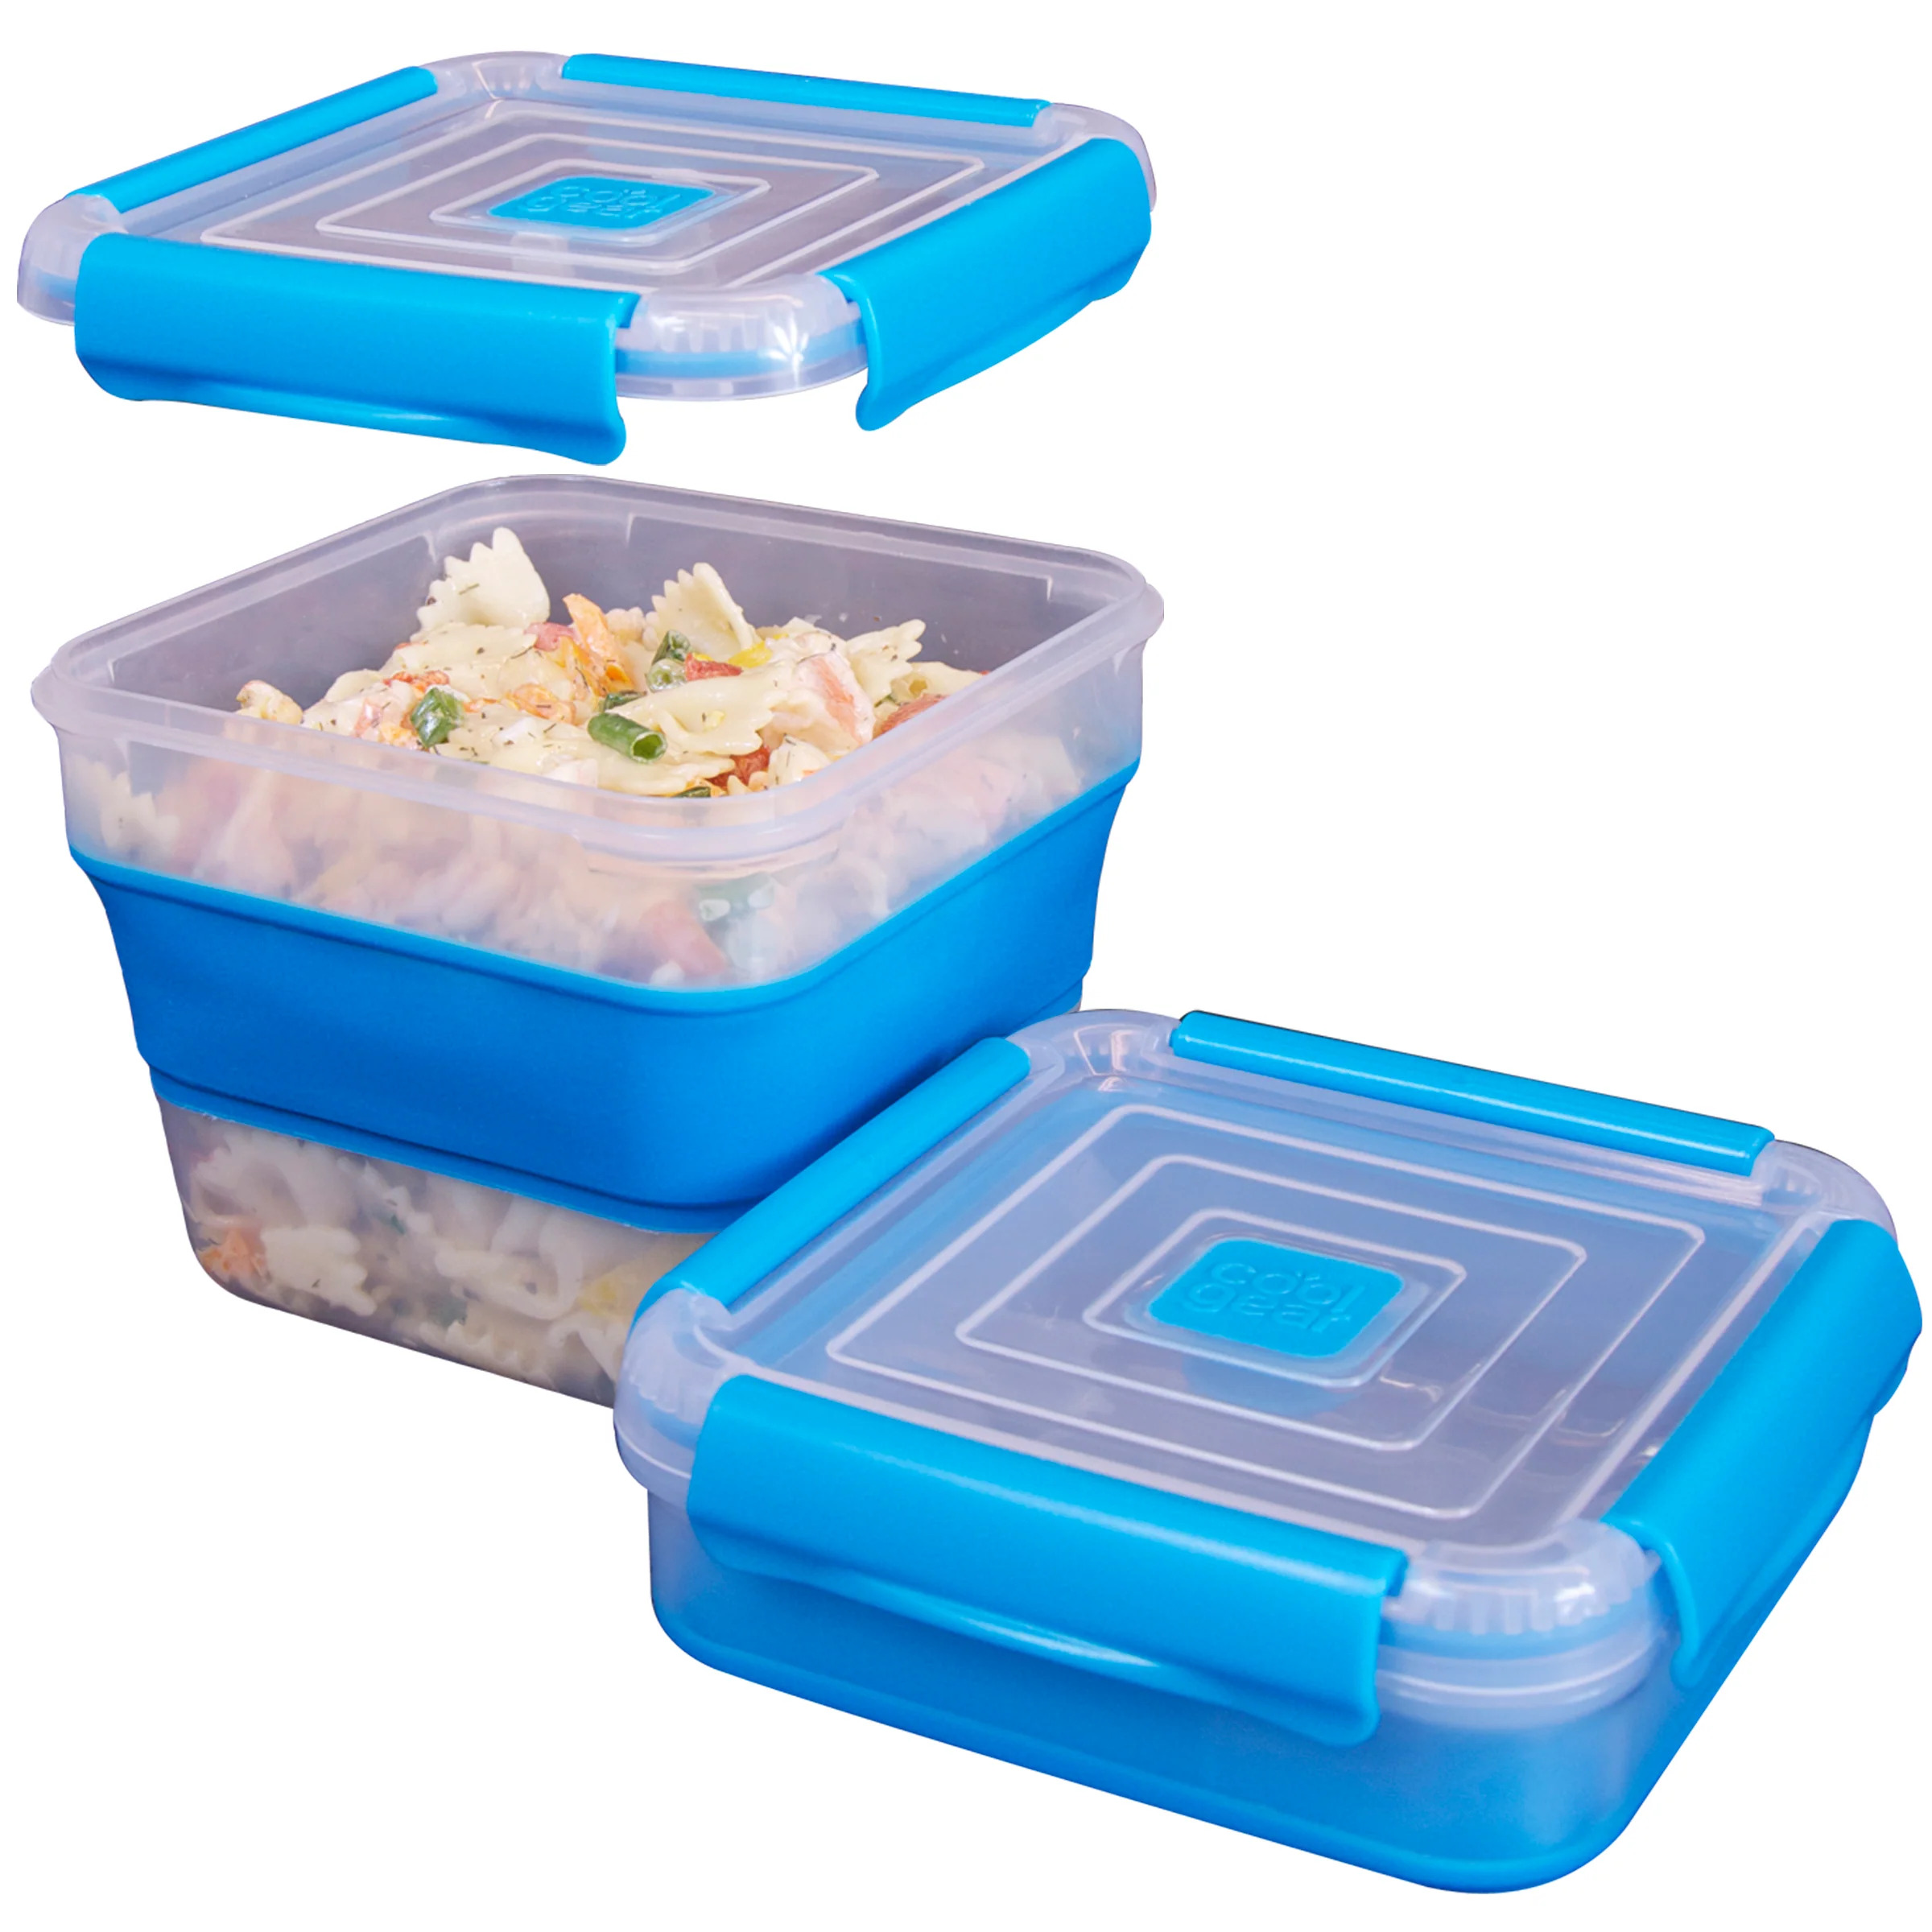 COOL GEAR 3-Pack Collapsible 5.5 Cup Square Food Container | Dishwasher and Microwave Safe | Perfect for On The Go Lunches and Leftovers | Expands to Hold 2x More | Air Tight Snaps Keeps Food Fresh - image 4 of 4